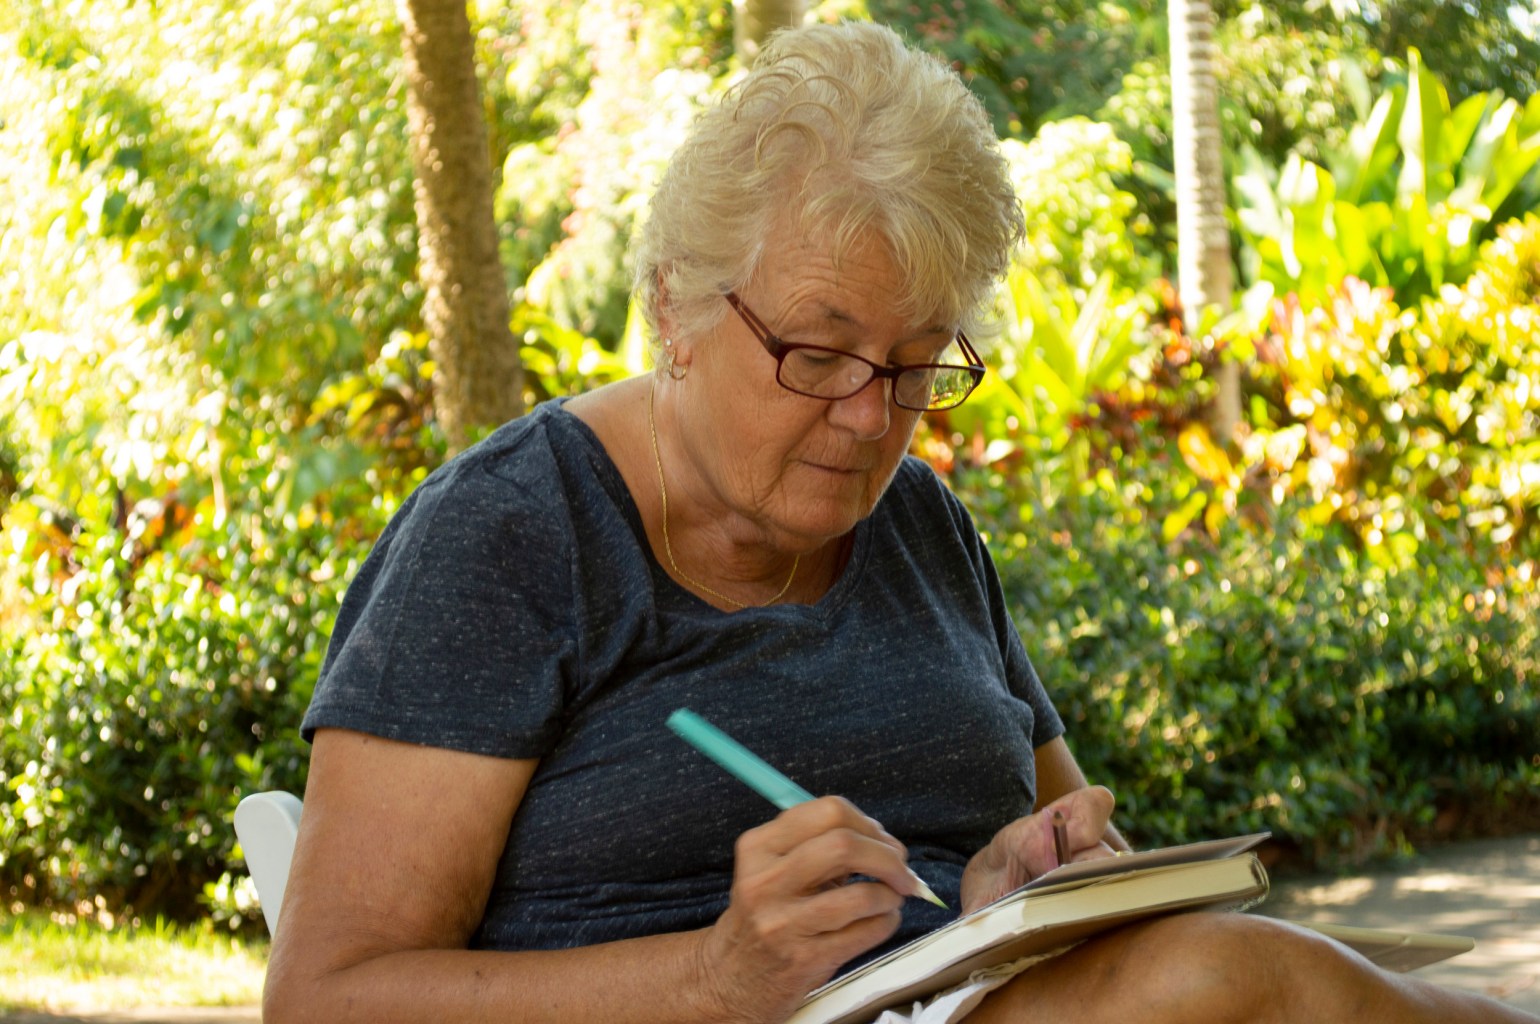 A person in a garden concentrating on a piece of paper with a drawing implement in hand